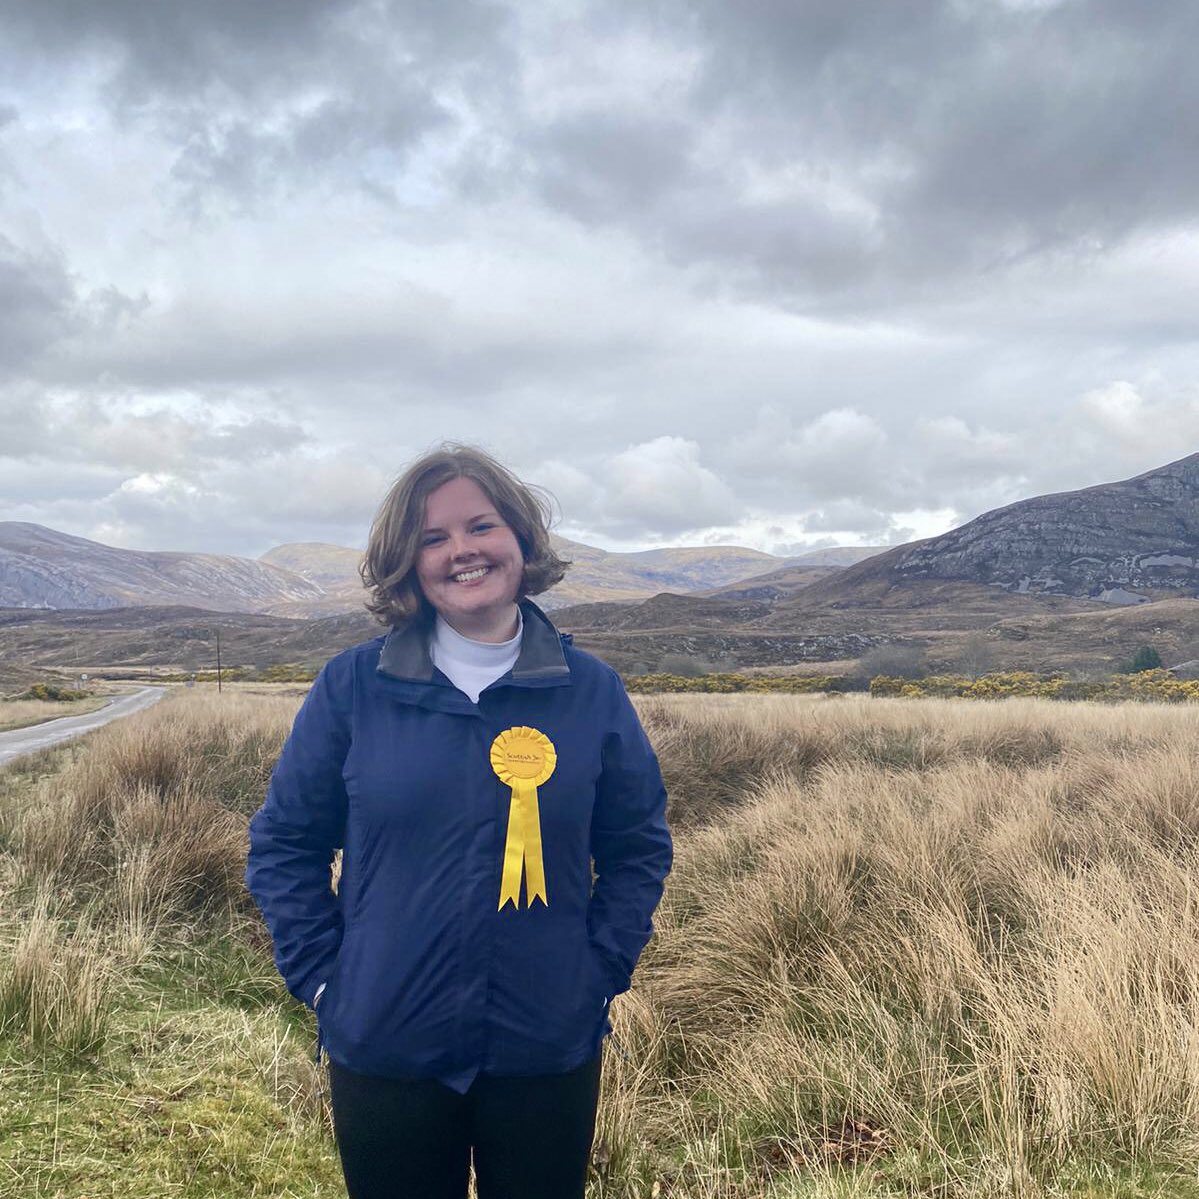 Caithness, Sutherland and Ross: the most beautiful constituency in Scotland. #WinningHere